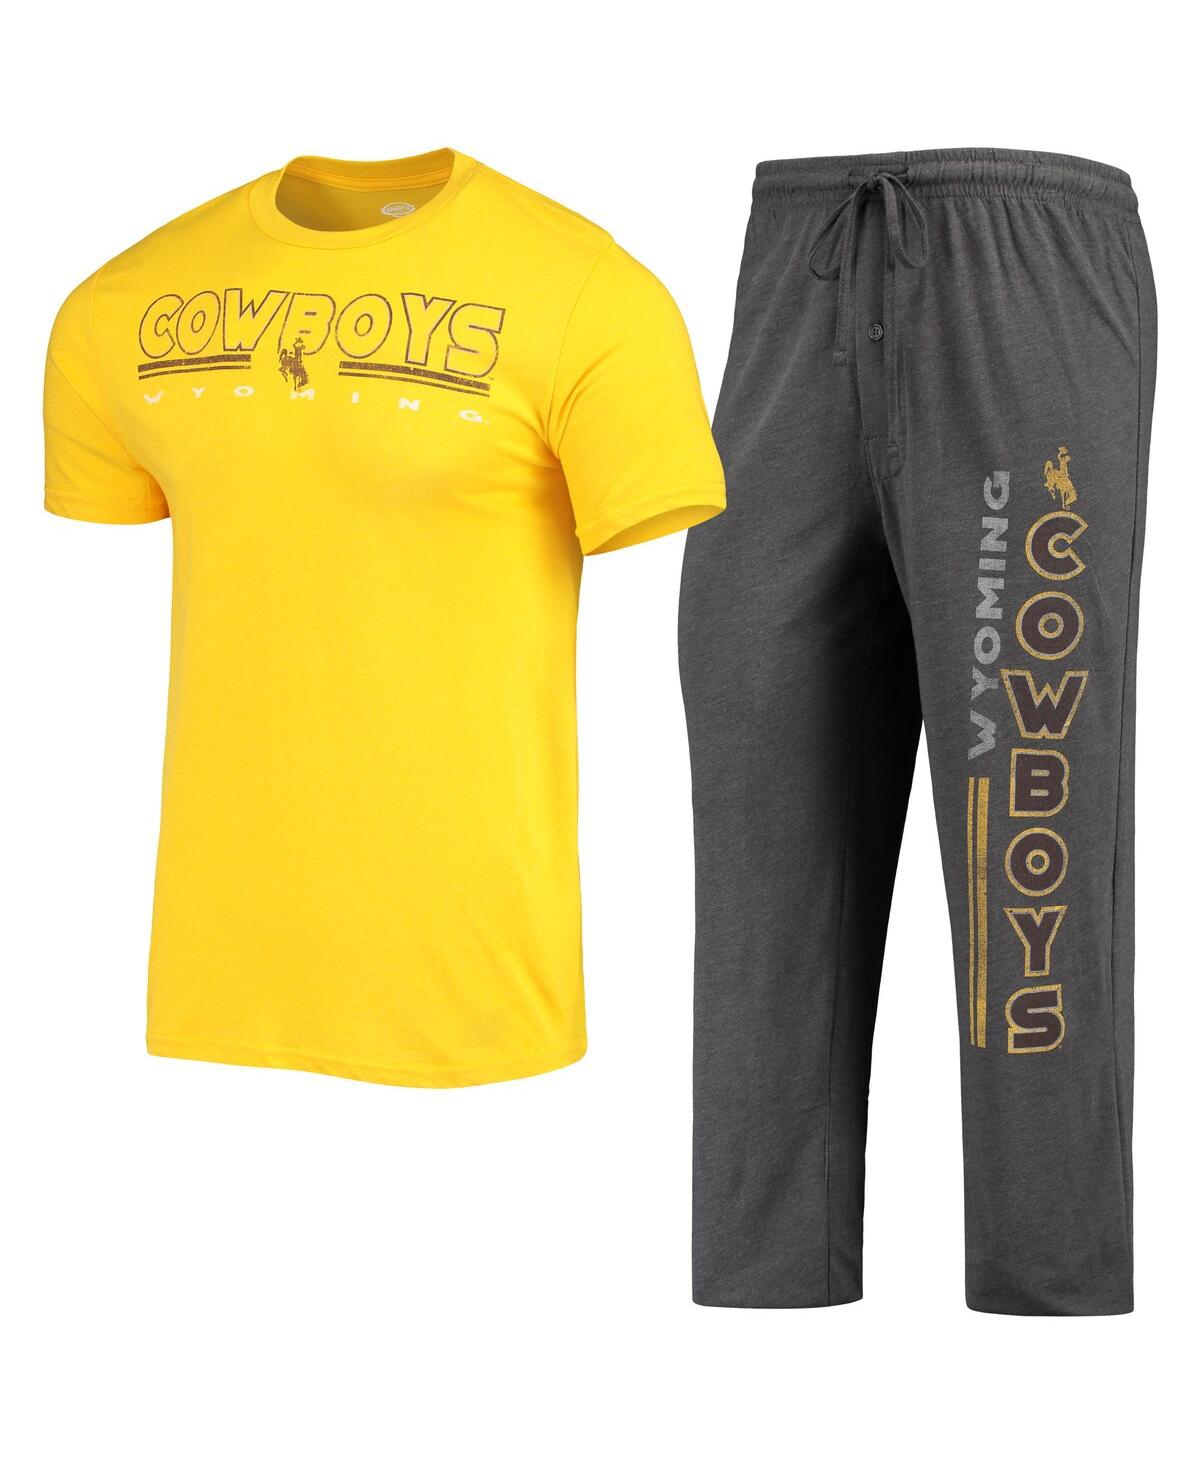 Men's Concepts Sport Heathered Charcoal and Gold Wyoming Cowboys Meter T-shirt and Pants Sleep Set - Heathered Charcoal, Gold